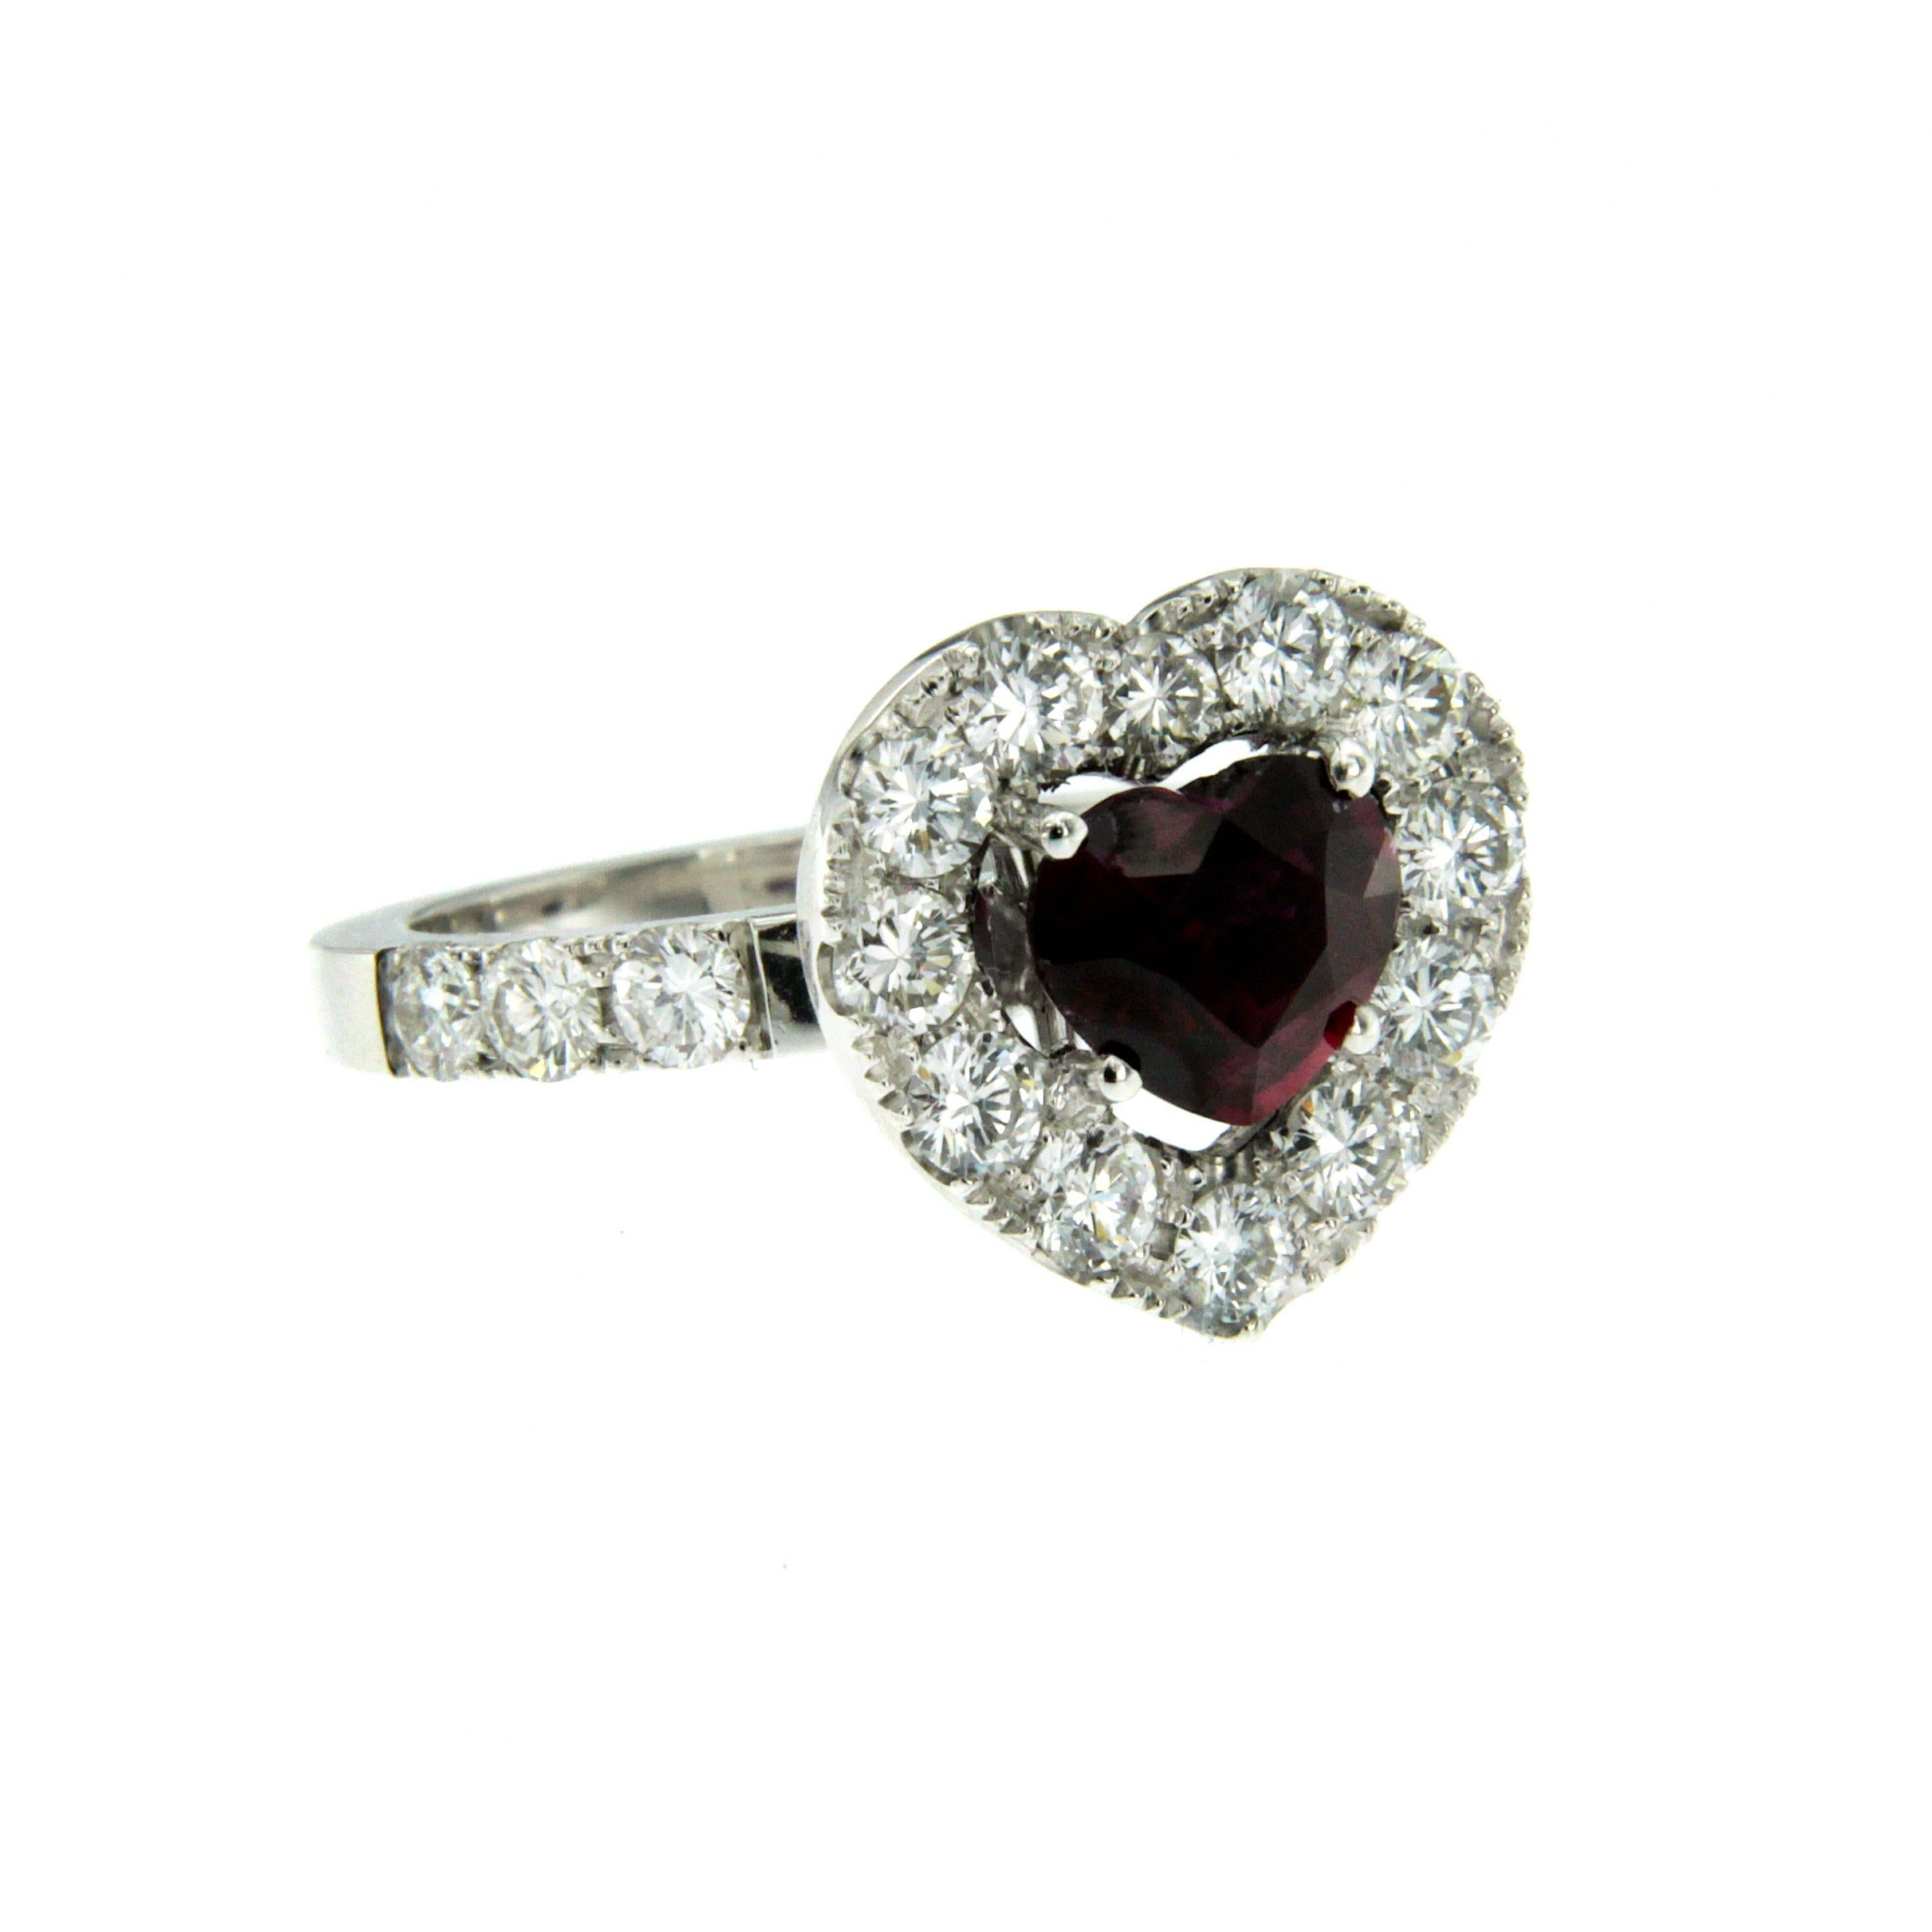 Beautiful 18k white gold ring set with a heart shaped ruby weighing 2.01 carats, flaked by round brilliant cut sparkling diamonds weighing 1.60 ct  F/G color VVS.

CONDITION: Brand New
METAL: 18k white Gold
GEM STONE: Ruby 2.01 ct - Diamond 1.60